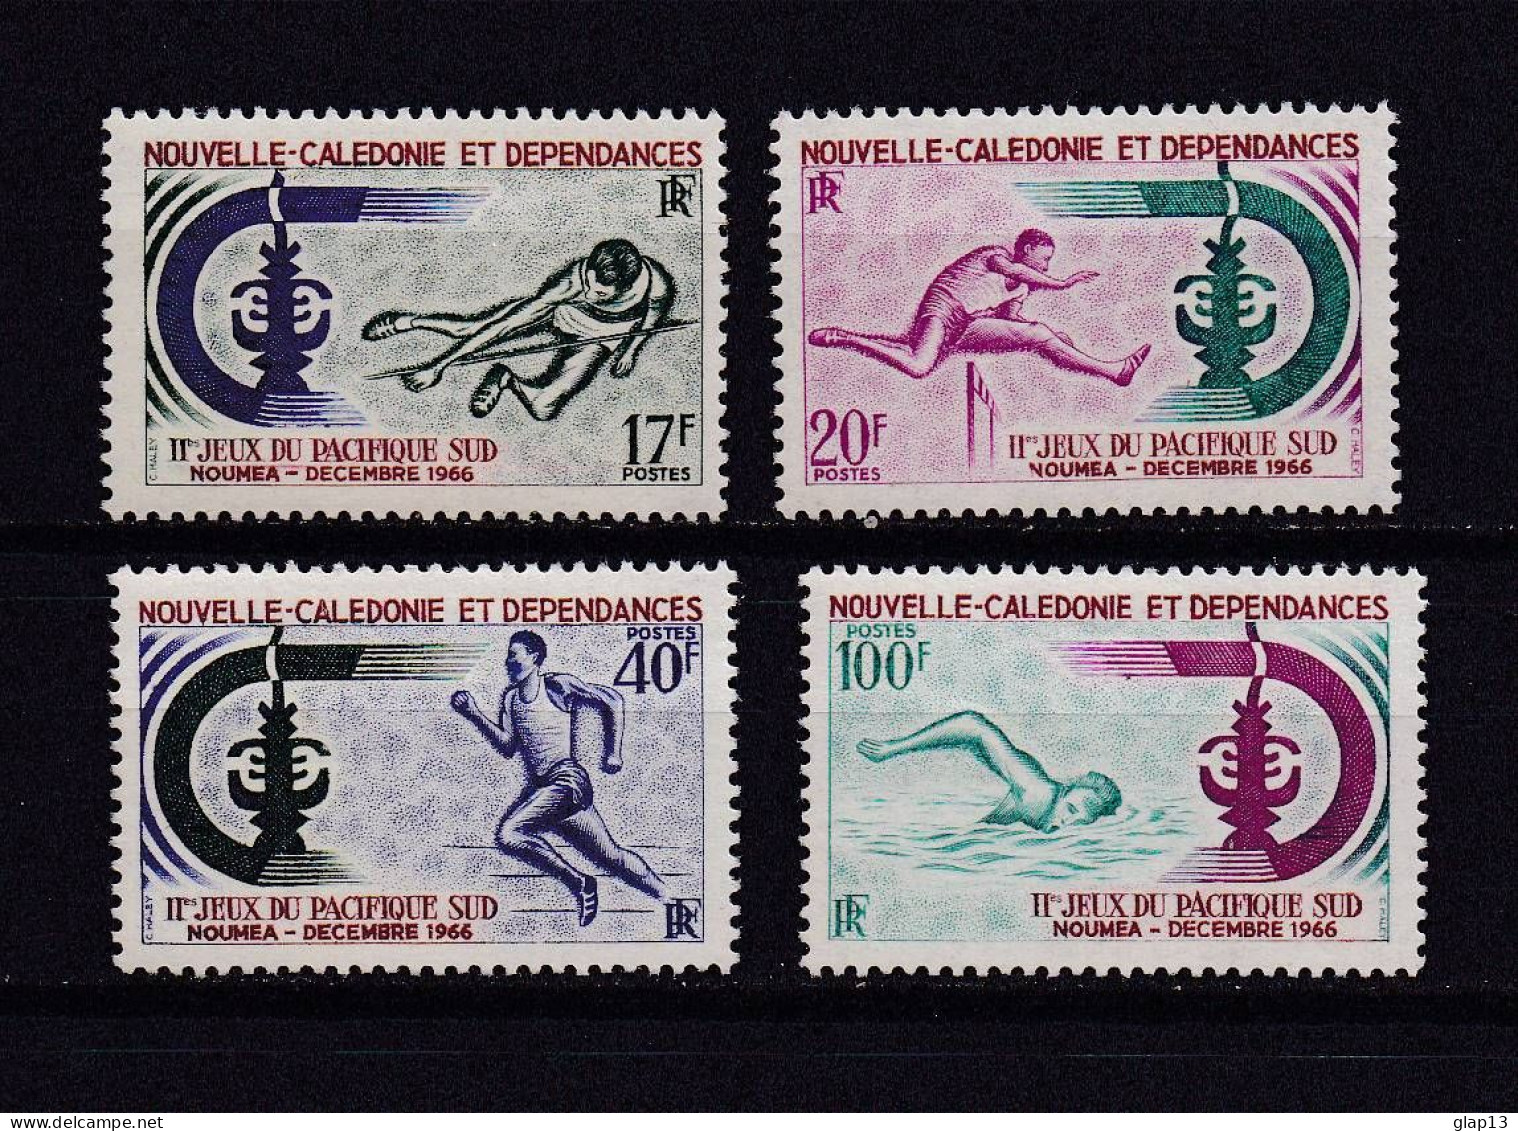 NOUVELLE-CALEDONIE 1966 TIMBRE N°332/35 NEUF AVEC CHARNIERE SPORTS - Nuevos